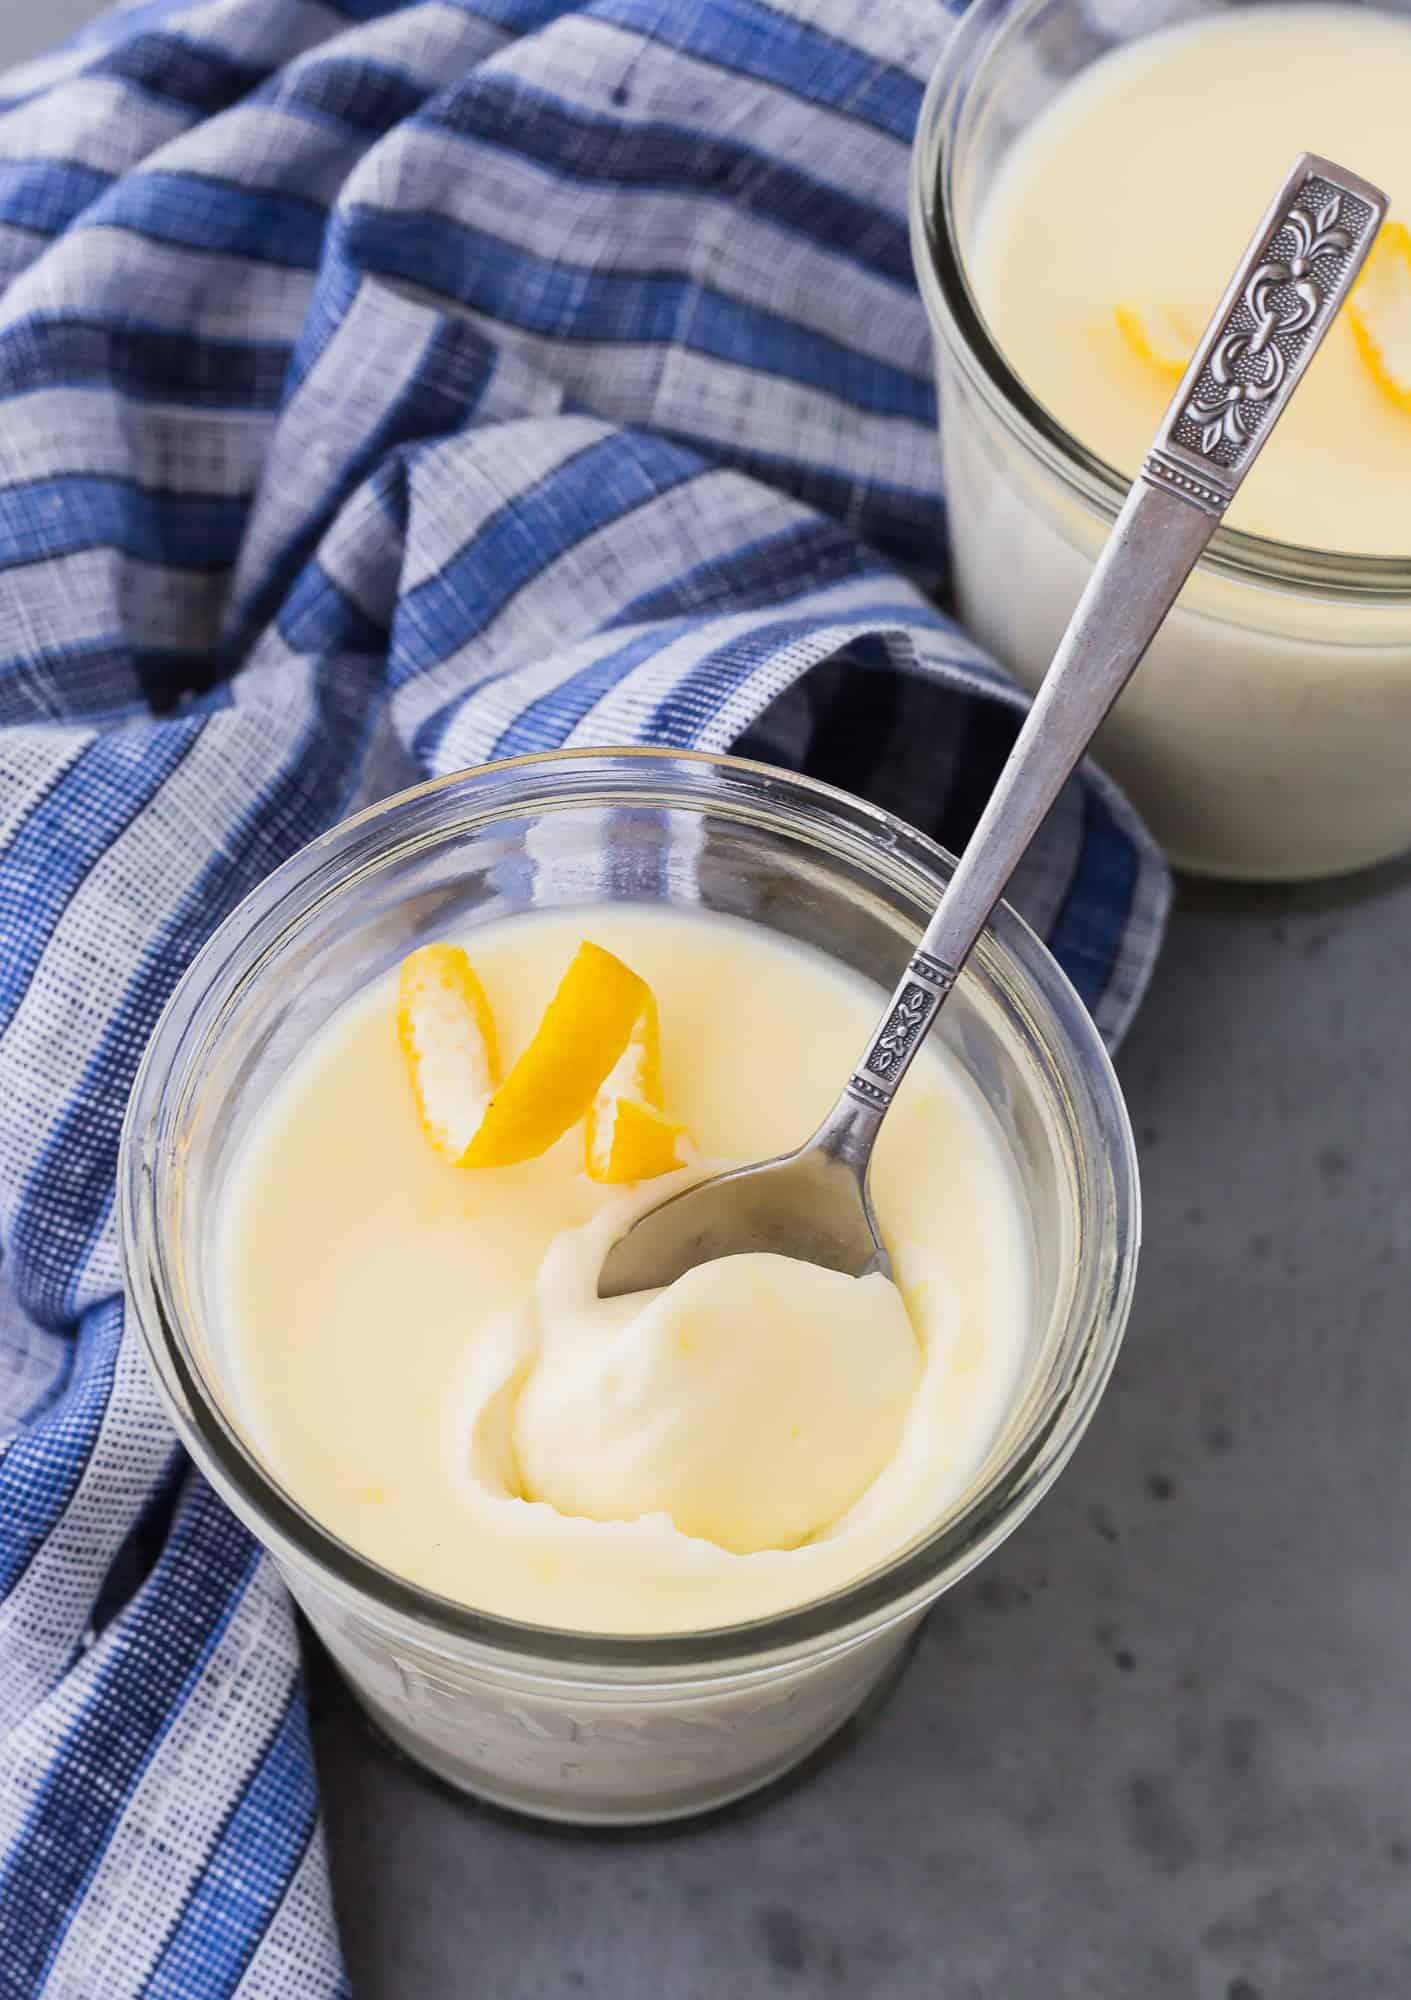 Lemon flavor pudding with a spoon inserted.